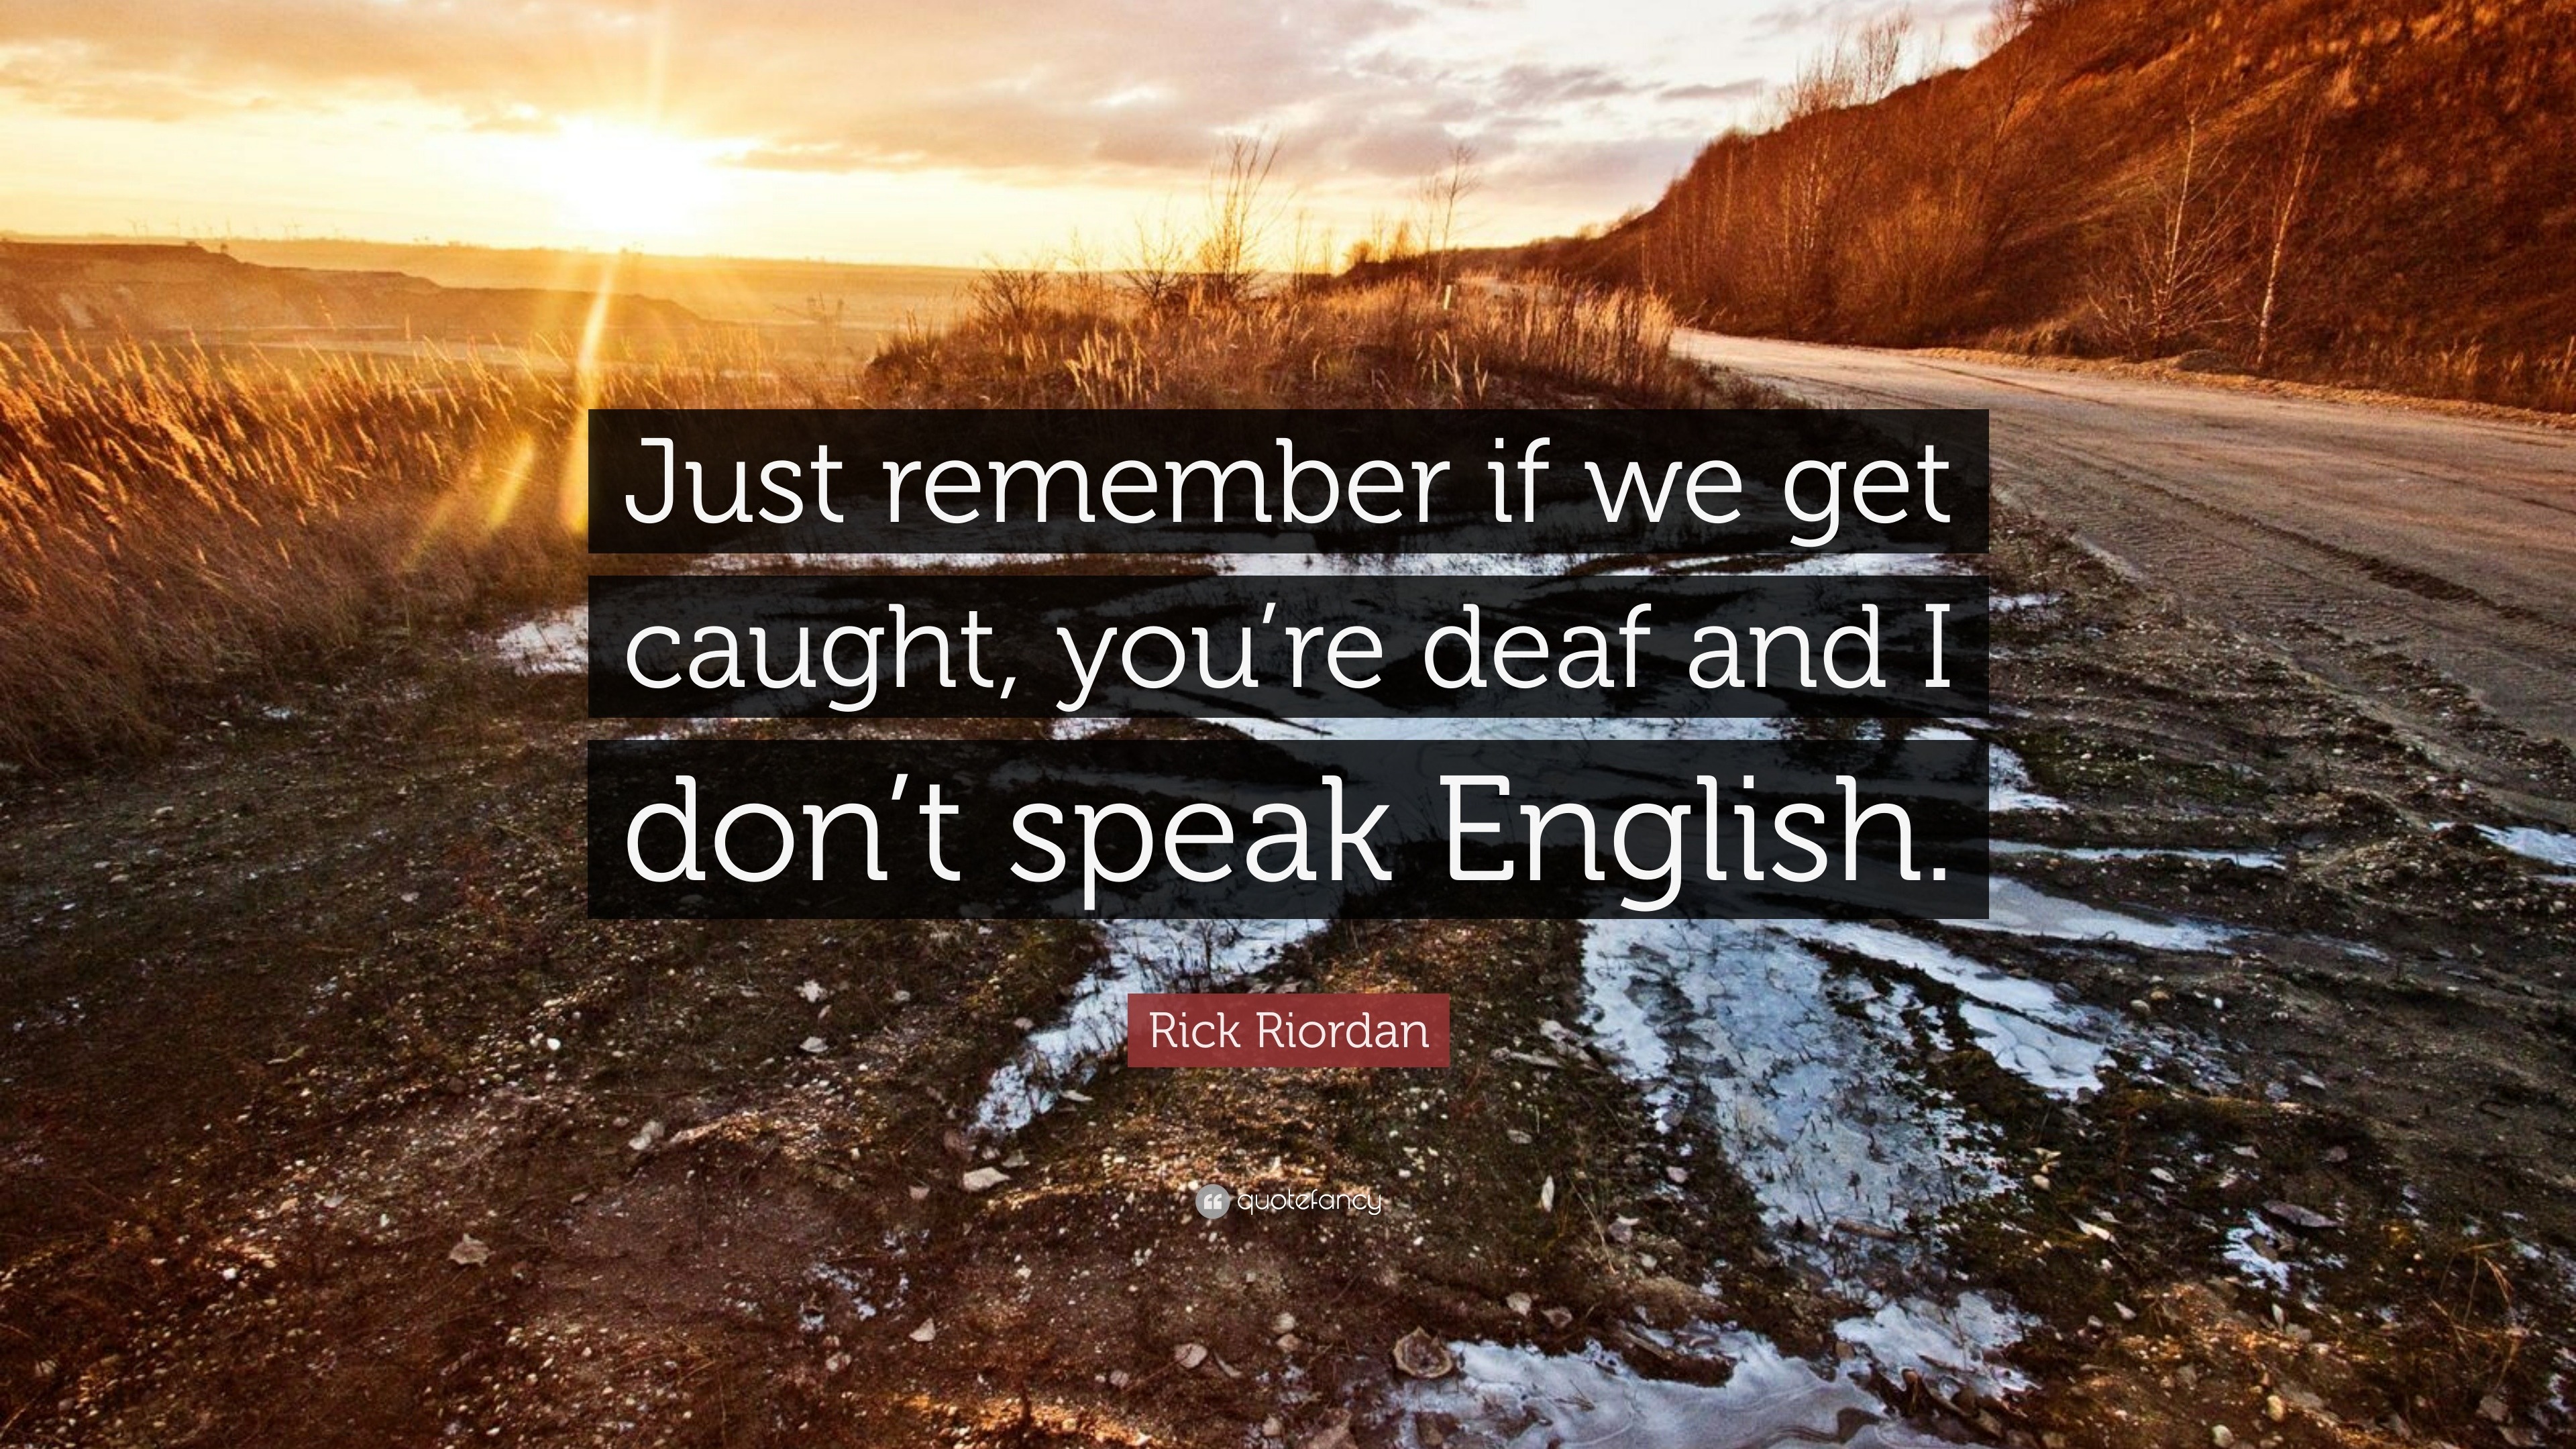 You're Deaf and I Don't Speak English Patch If We get Caught Remember 